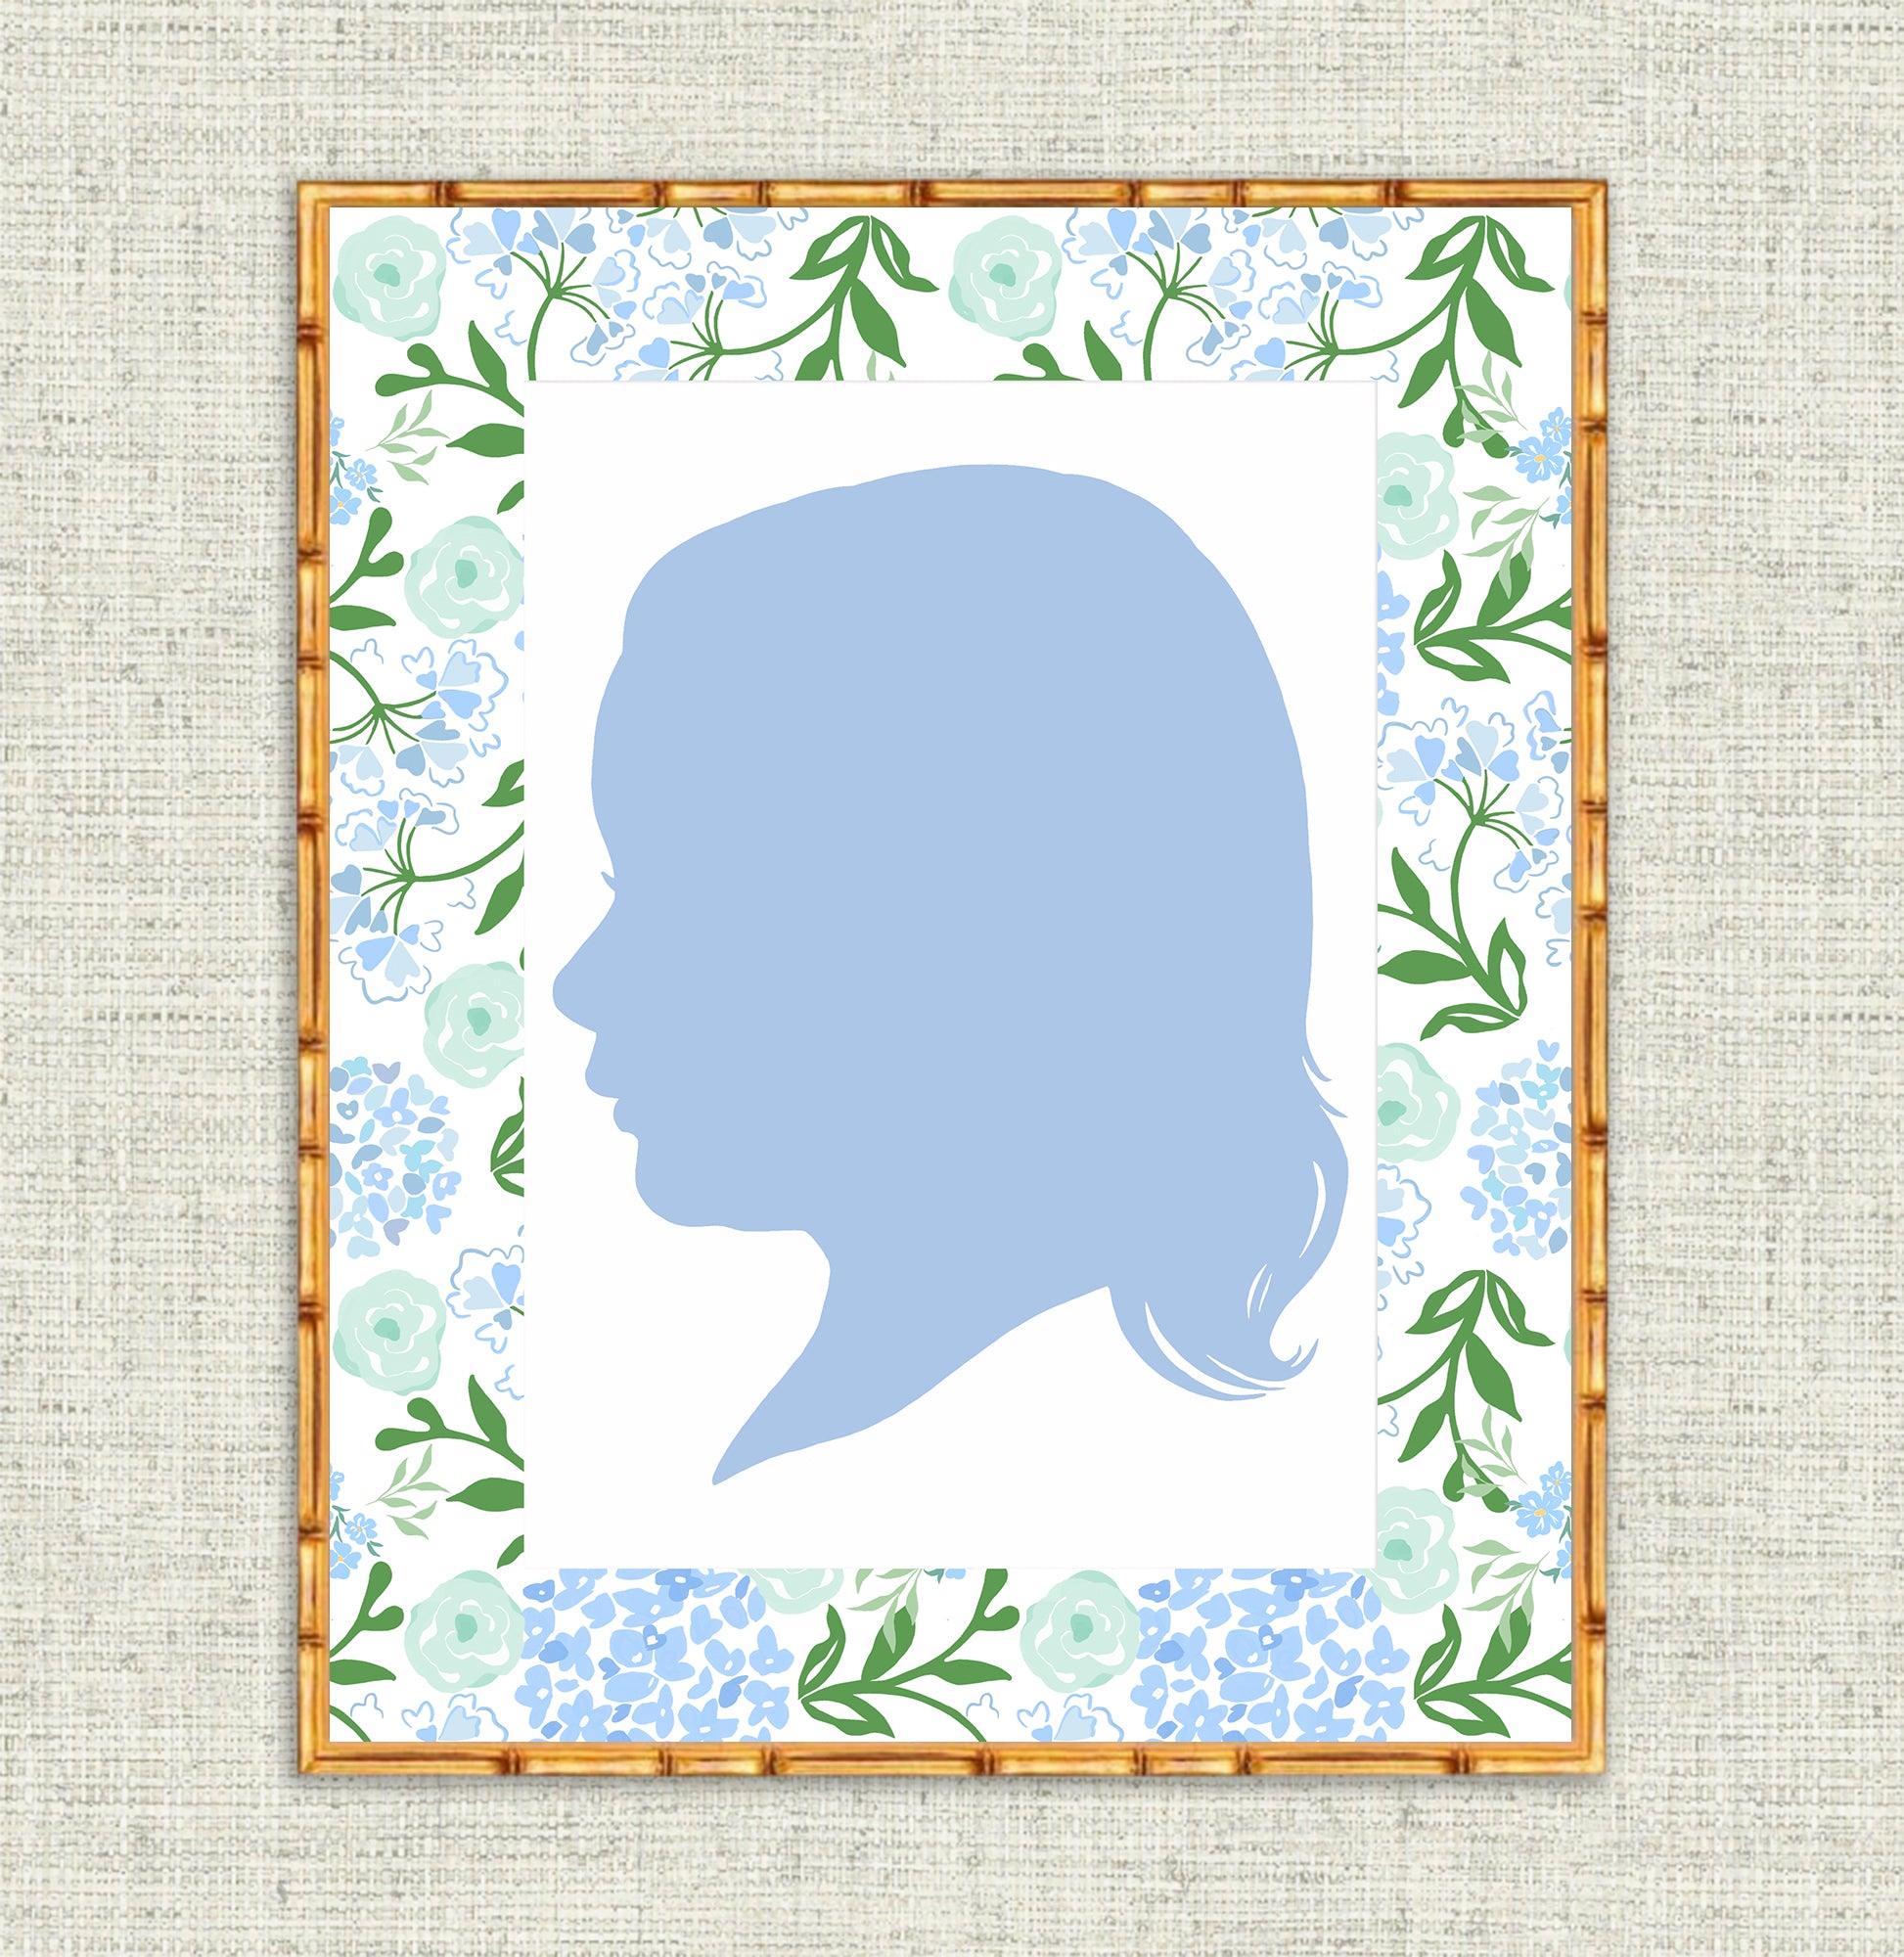 The Nantucket Style Cameo Silhouette